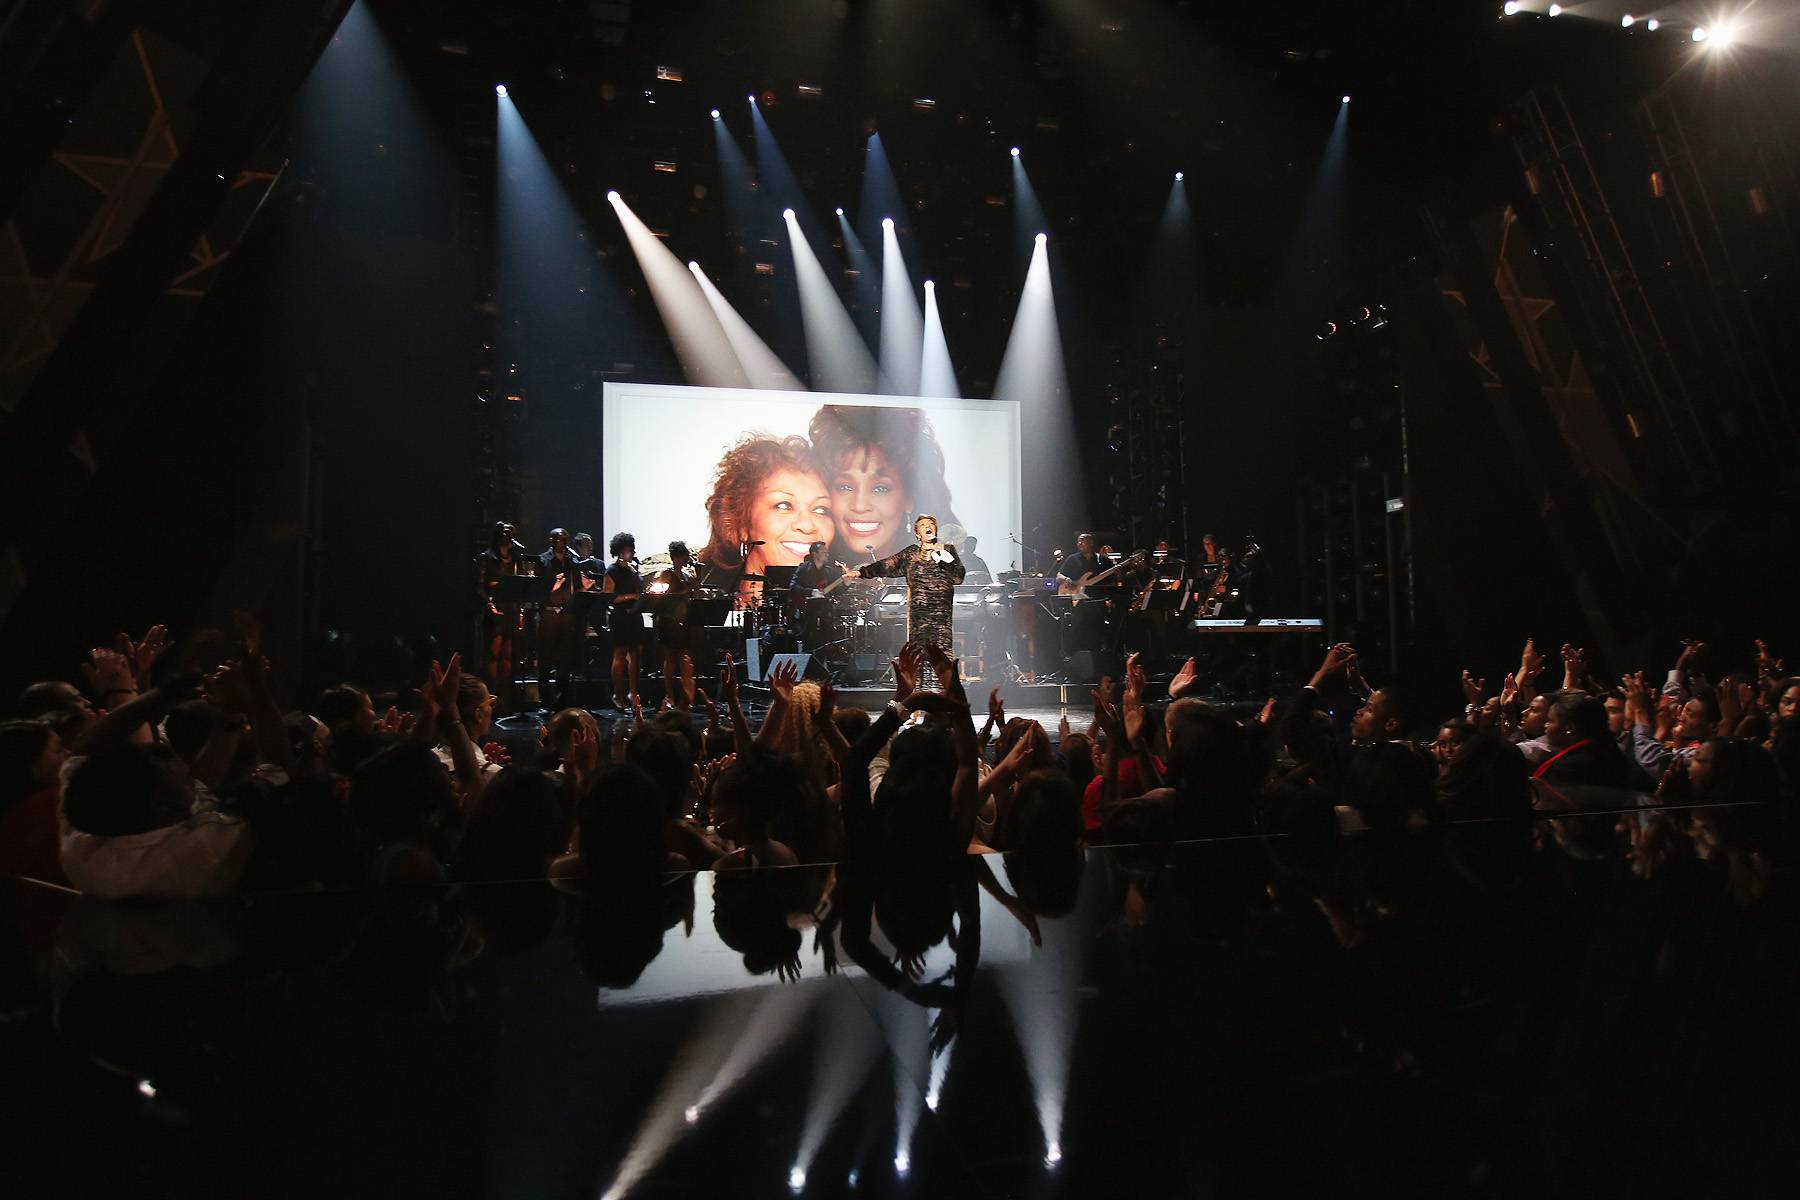 A Night to Remember - The 2012 BET Awards kicks off with a heartfelt tribute to the incomparable Whitney Houston. Here Cissy Houston sings songs of praise for her daughter Nippy.As we gear up for the 2013 BET Awards, relive all the great backstage, on stage and award-winning moments from last year's show. Don't forget, Anything Can Happen!(Photo: Christopher Polk/Getty Images For BET)